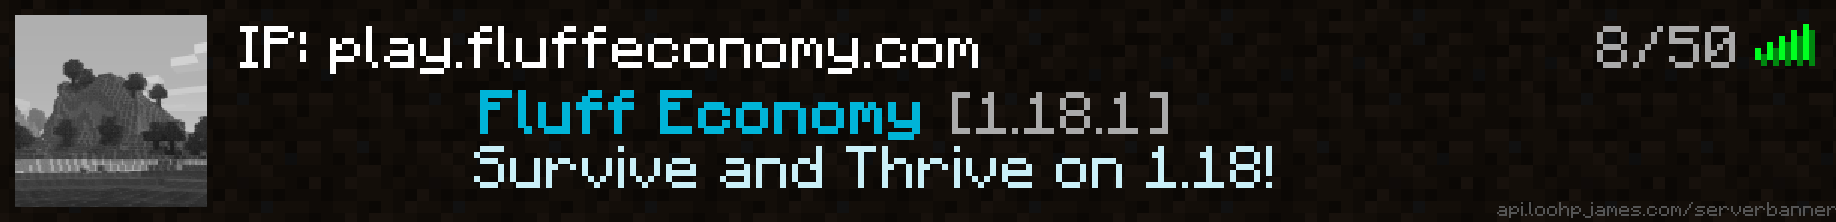 FluffEconomy - Dynamic and Player Driven Minecraft Server